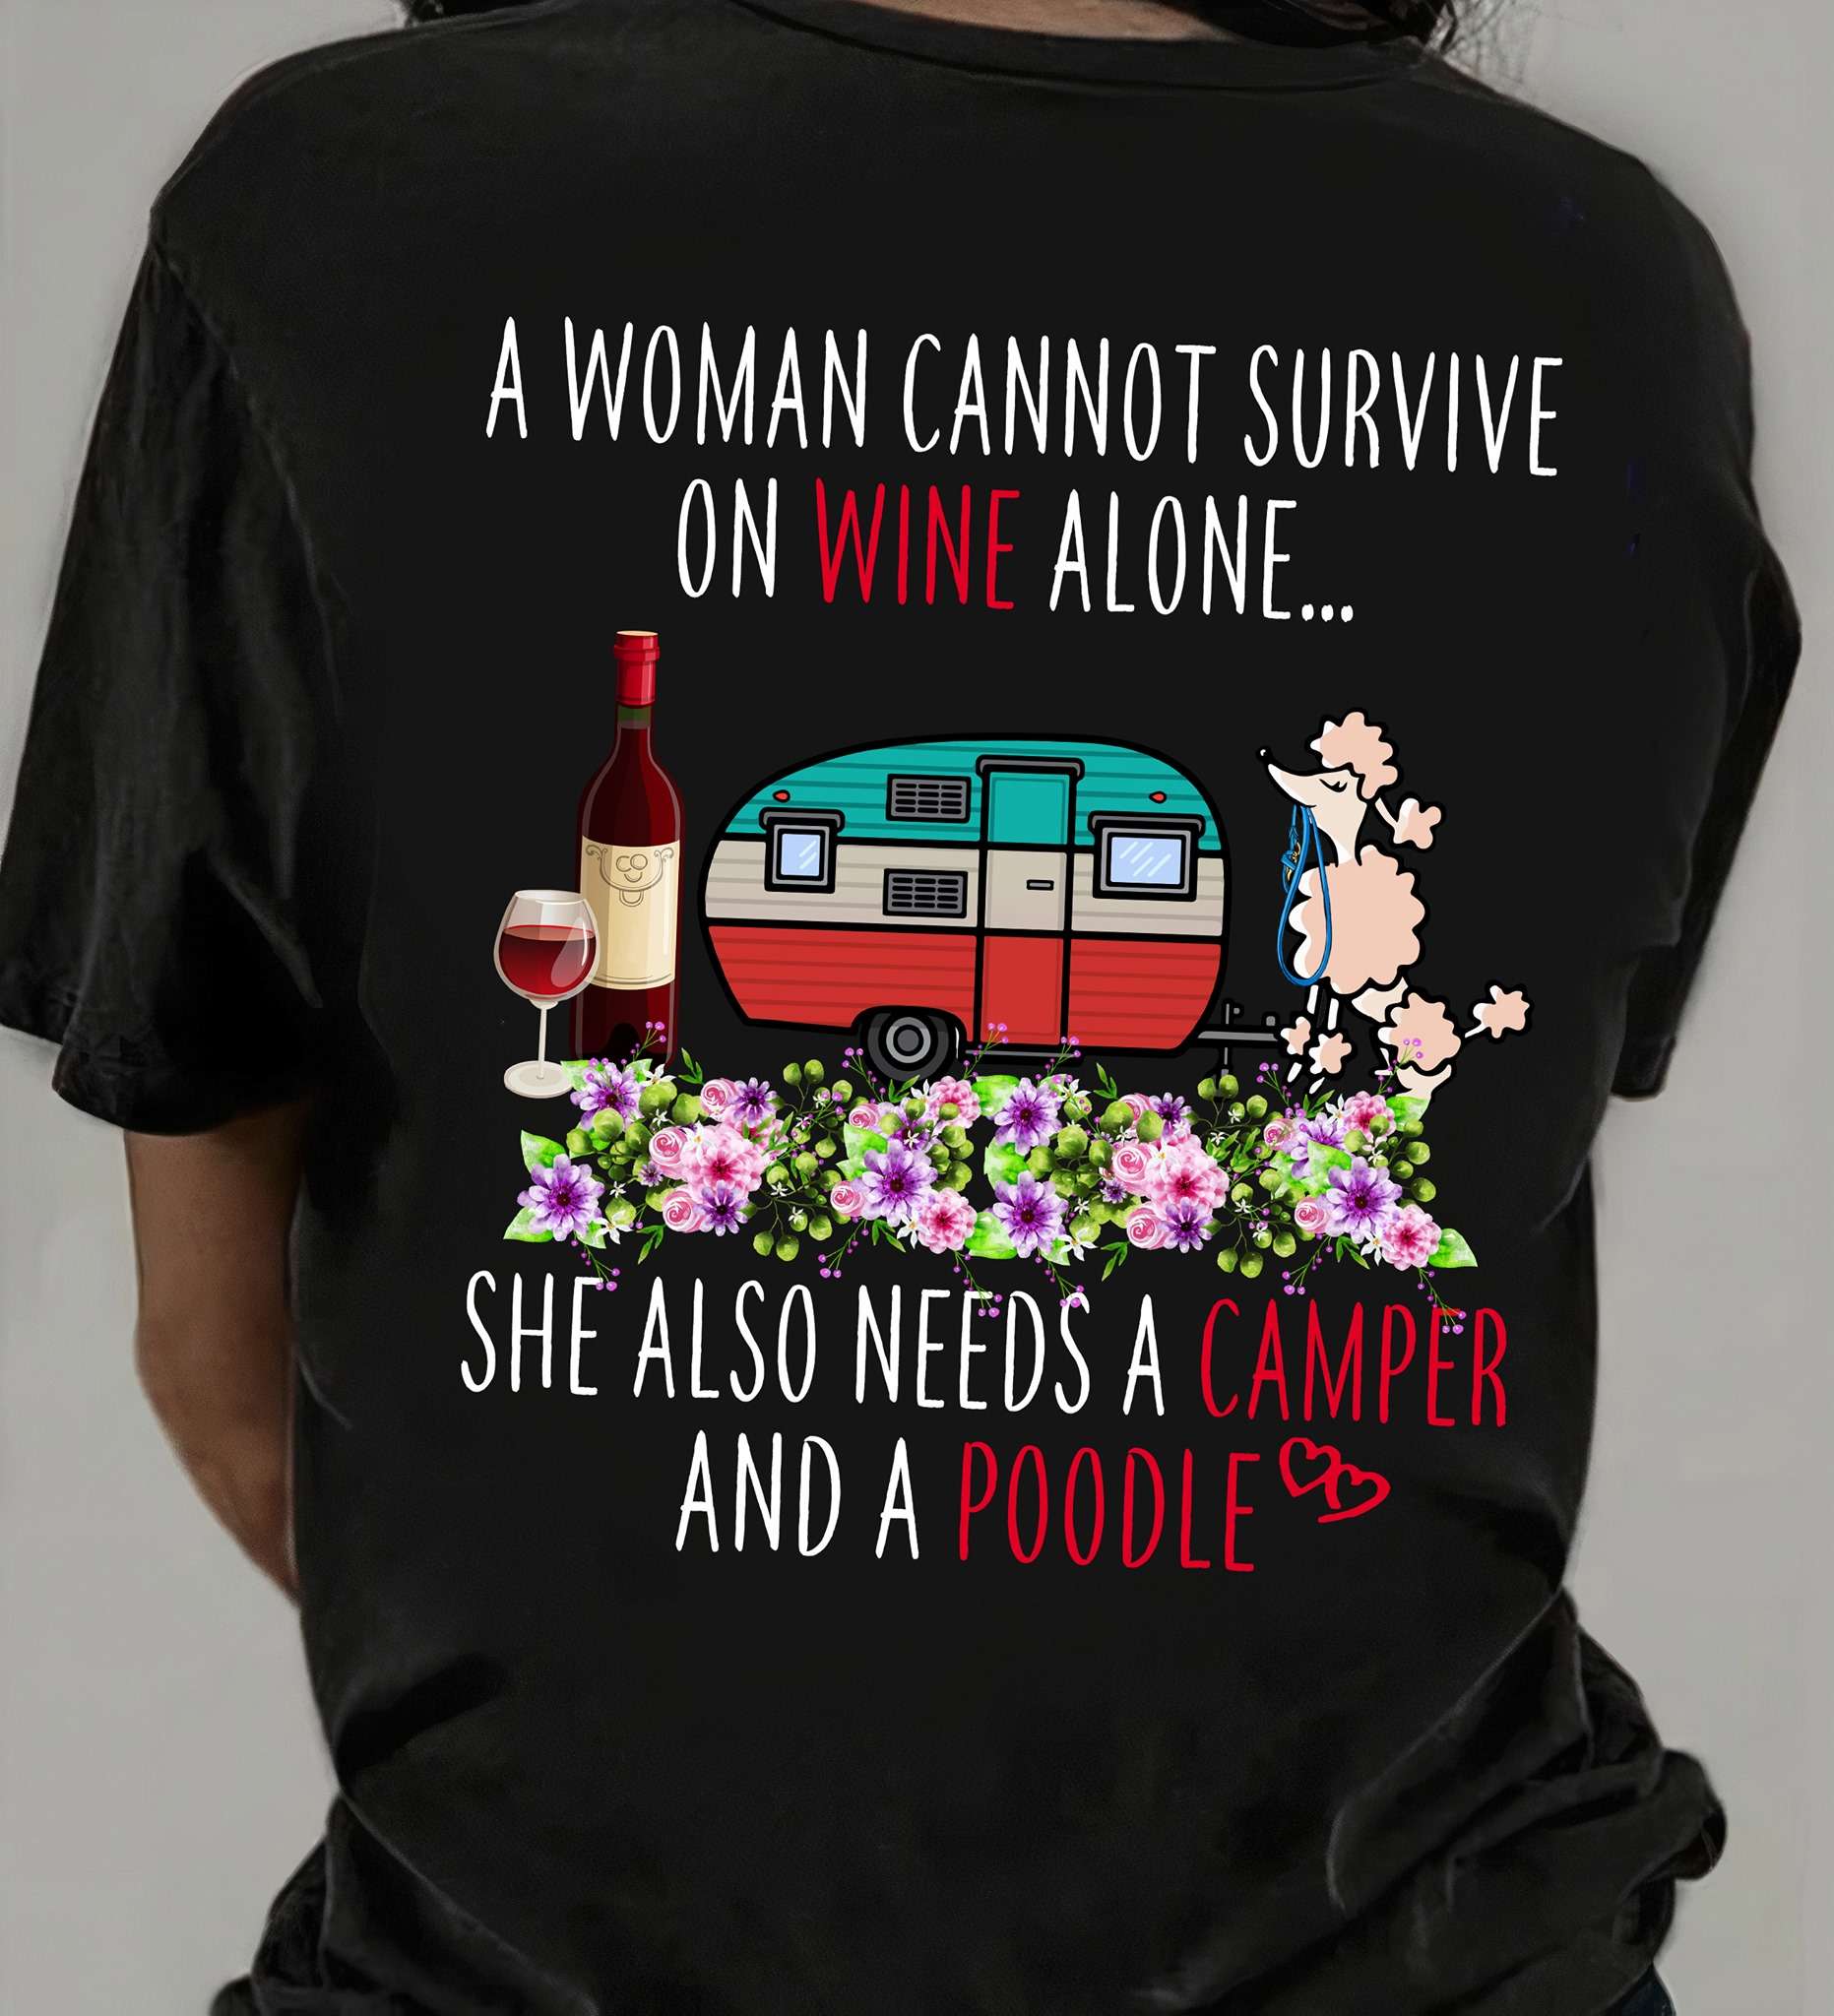 A woman cannot survive on wine alone she also needs a camper and a poodle